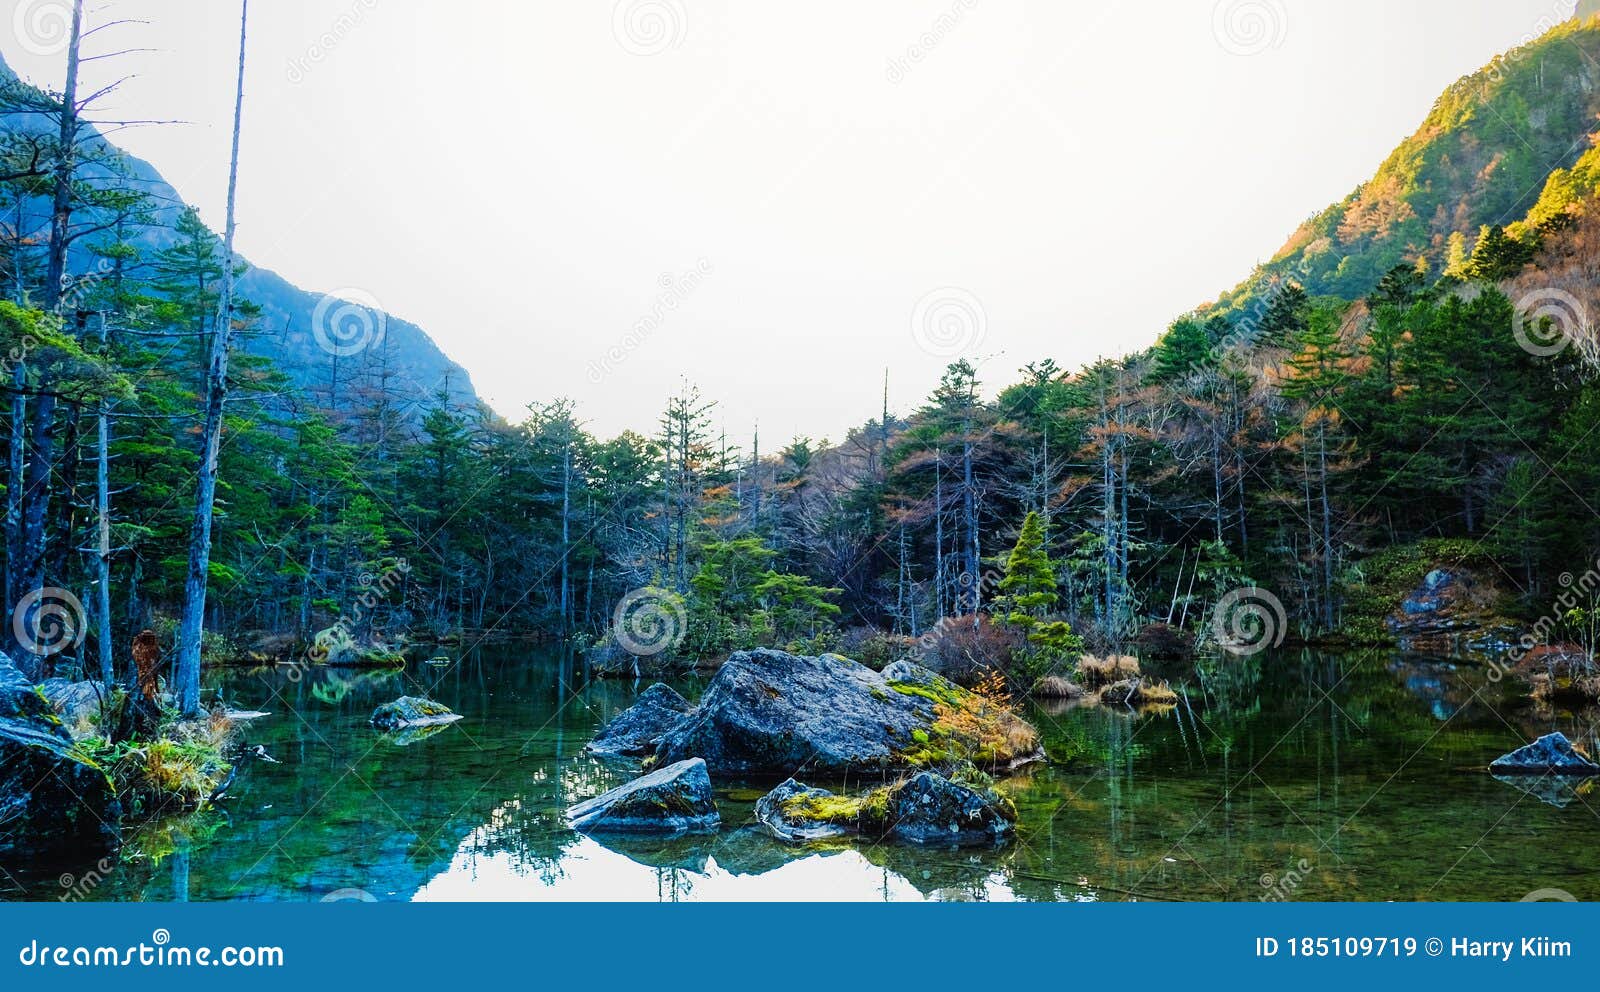 Scenic Landscape View Of Nature With Mountain Hills Trees And Water